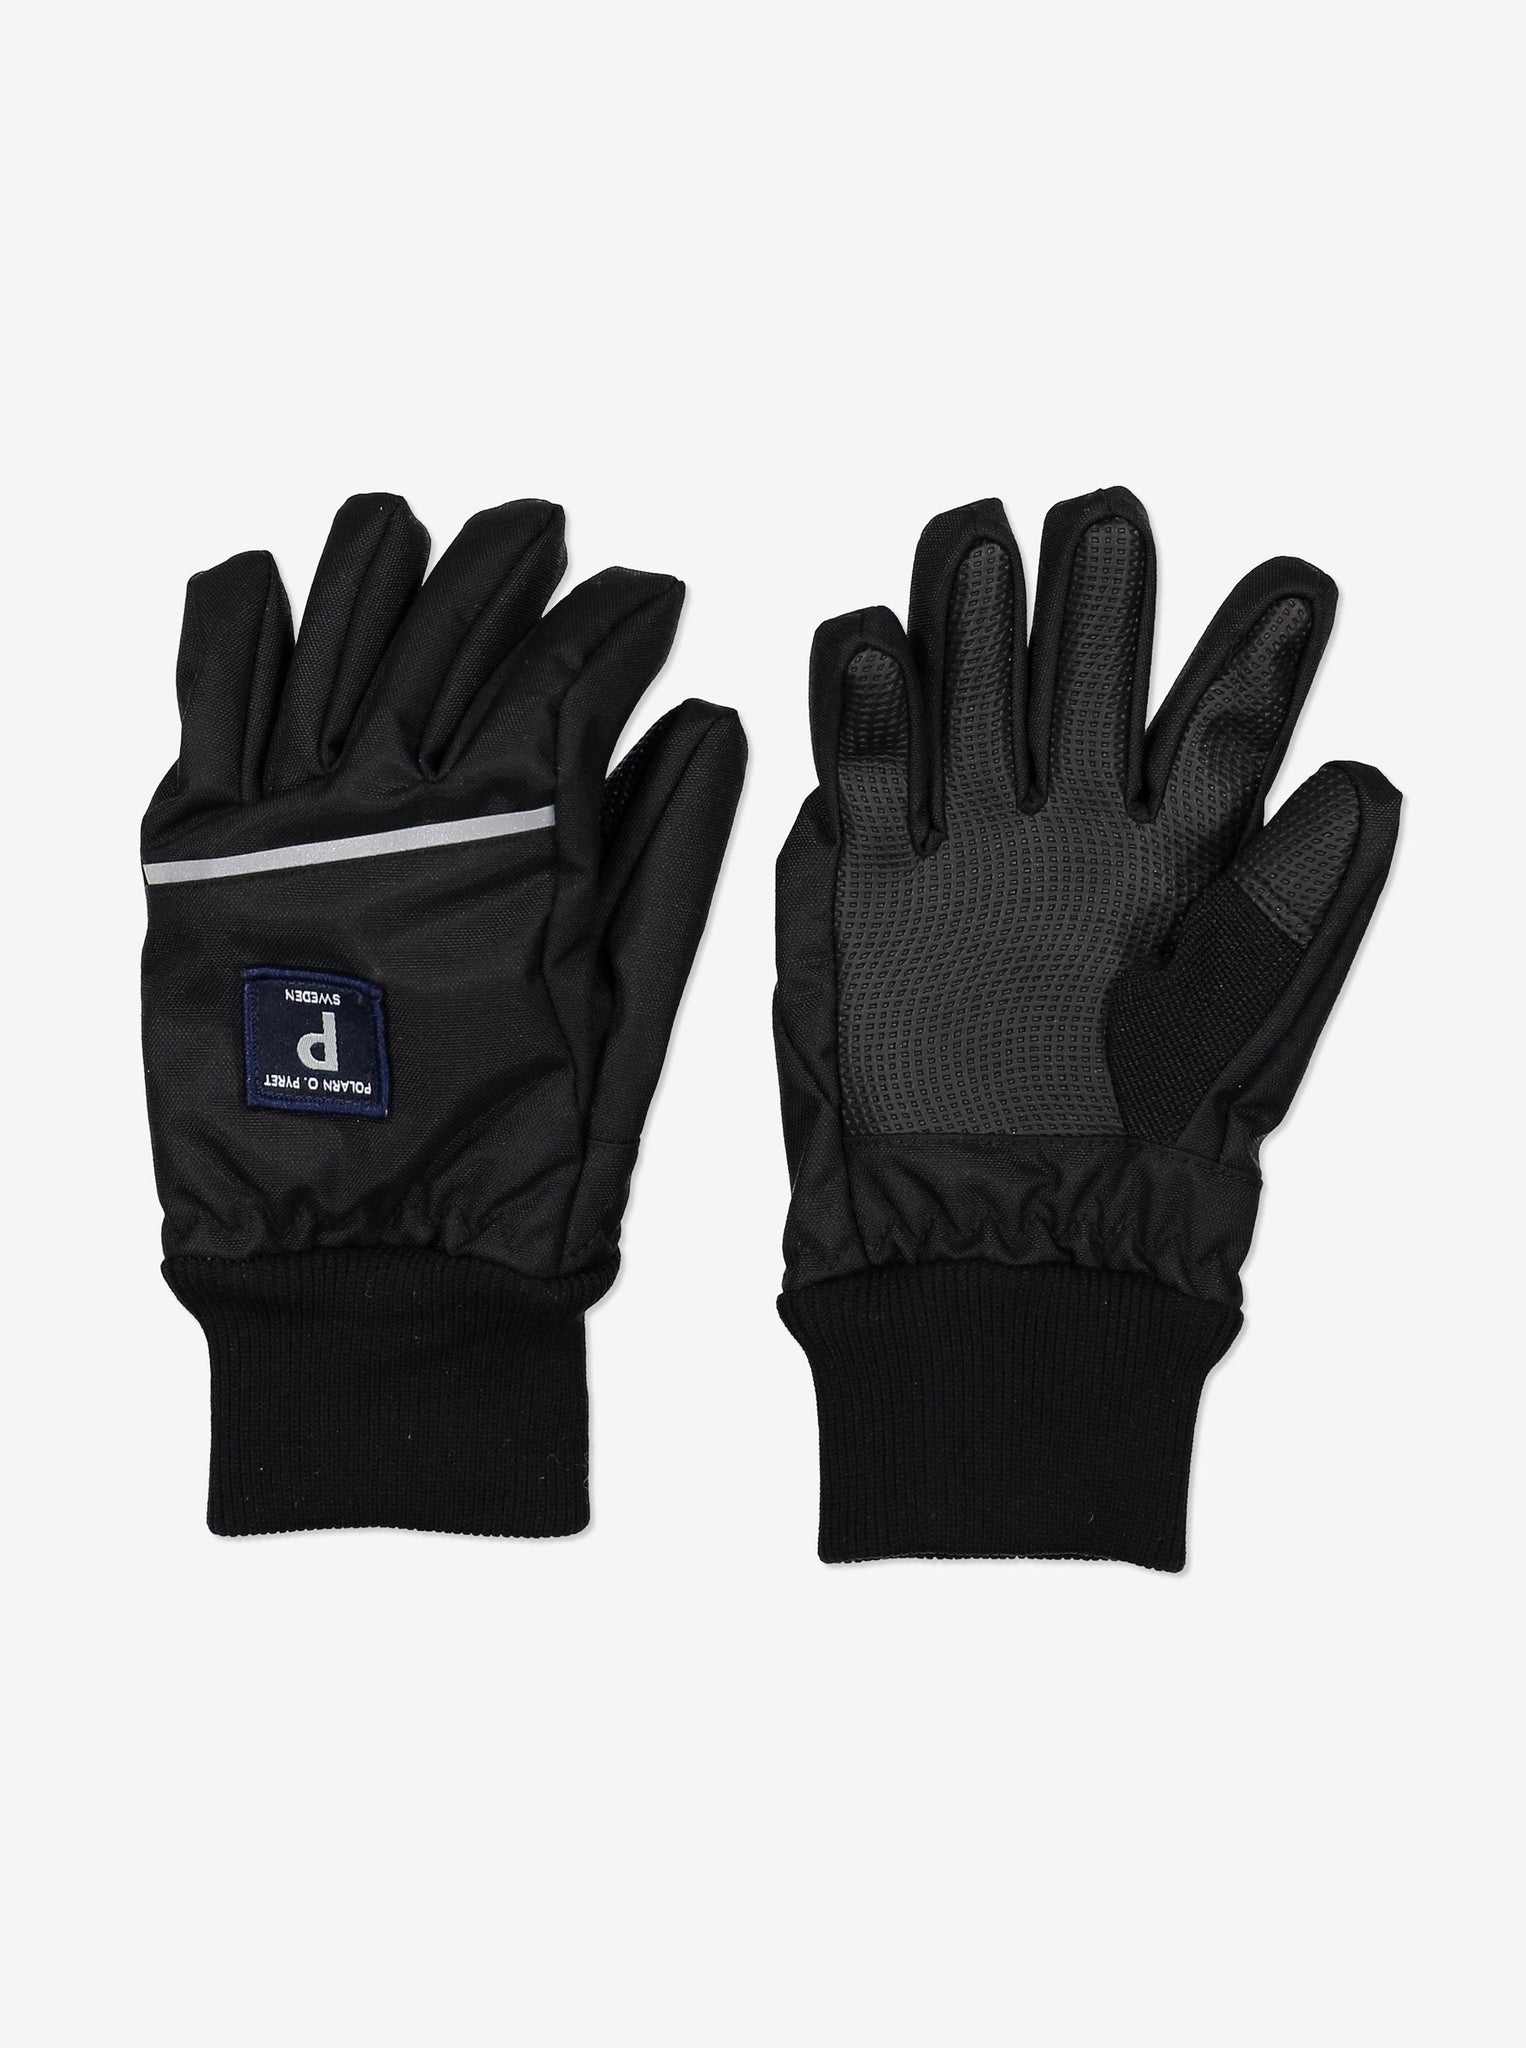 Black Softshell Kids Gloves from the Polarn O. Pyret kidswear collection. Ethically produced outerwear.